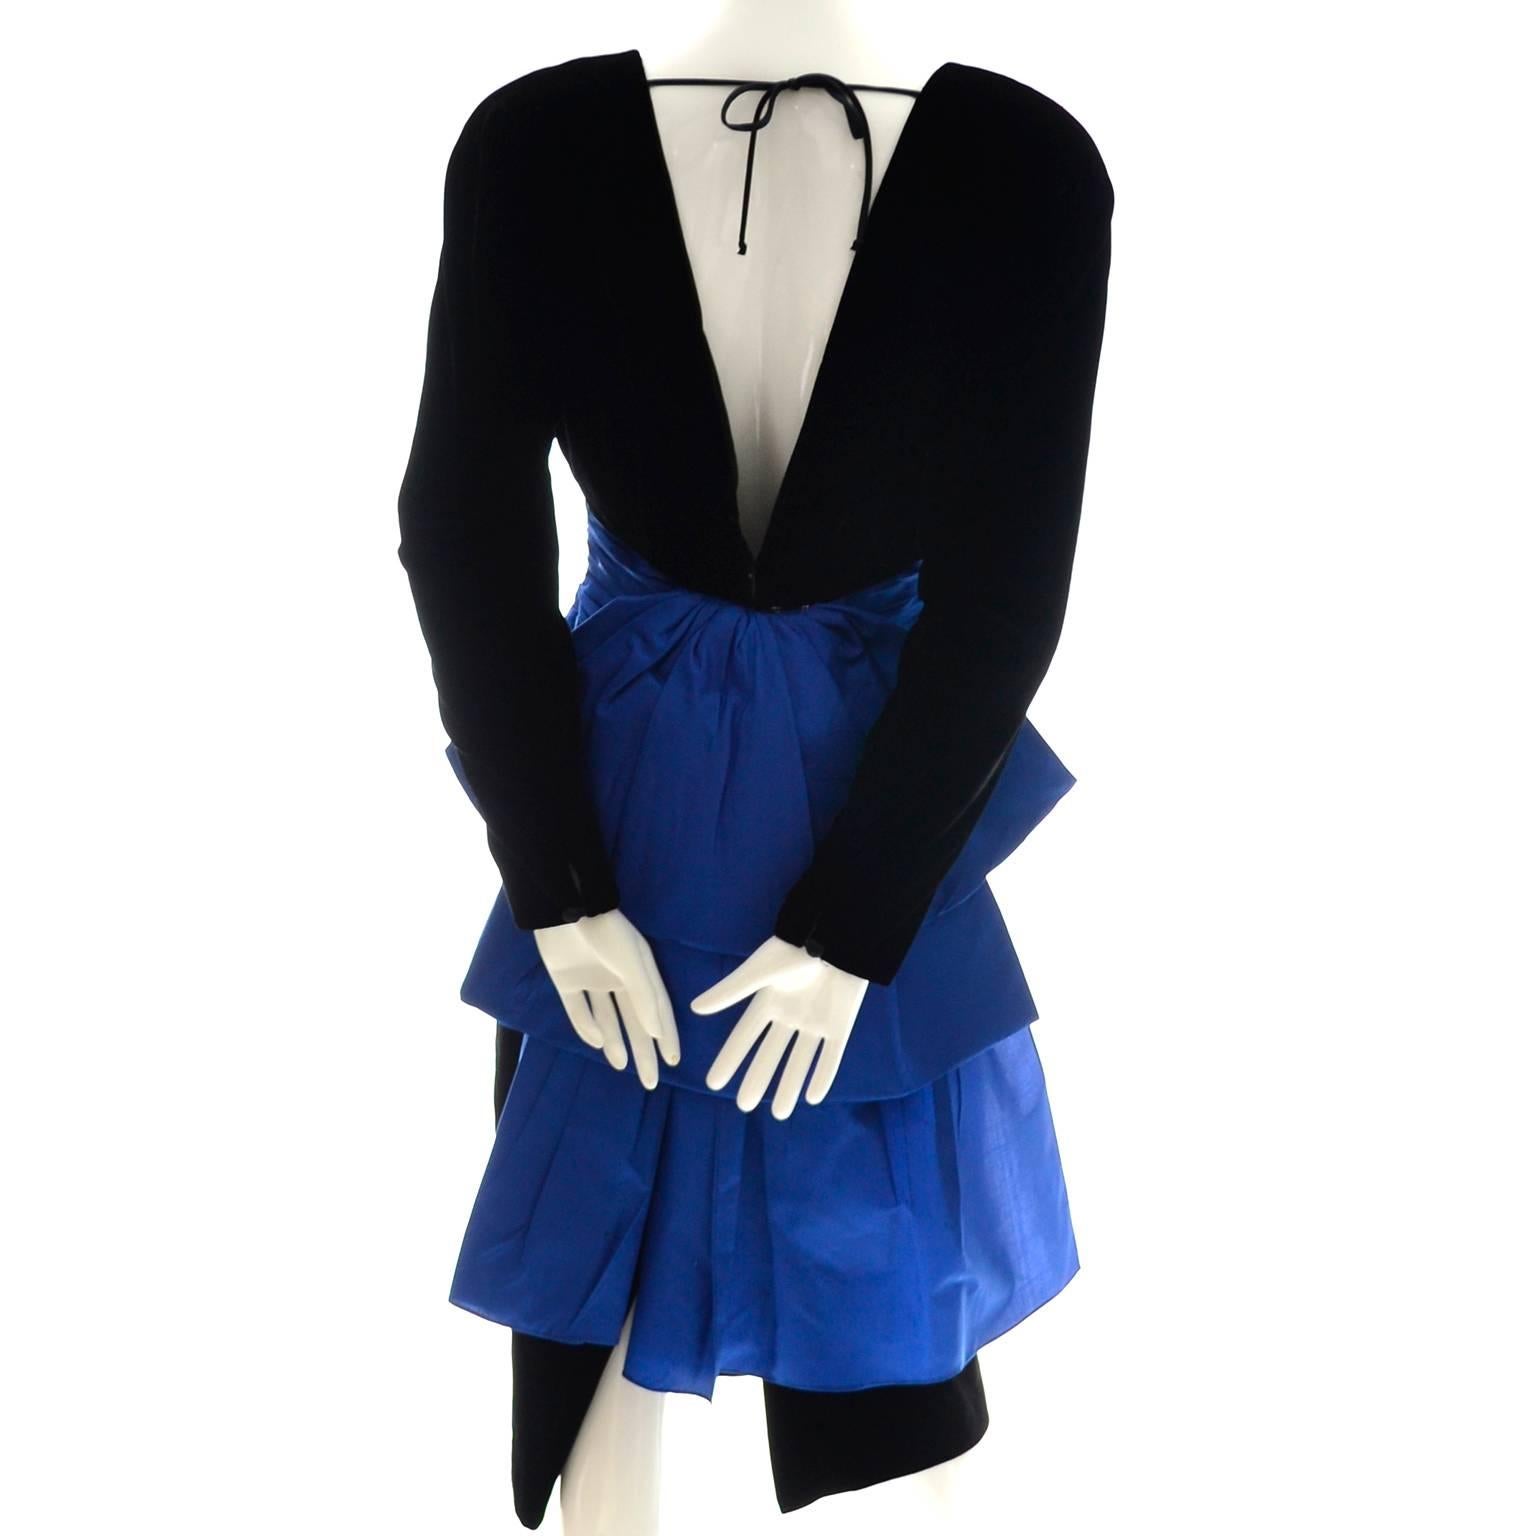 This pretty 1980's vintage A. J. Bari dress is made of a beautiful silk and rayon black velvet fabric and accented with blue taffeta at the waist. There are shoulder pads and the back of the dress ties at the neck and is open to the waist. There is